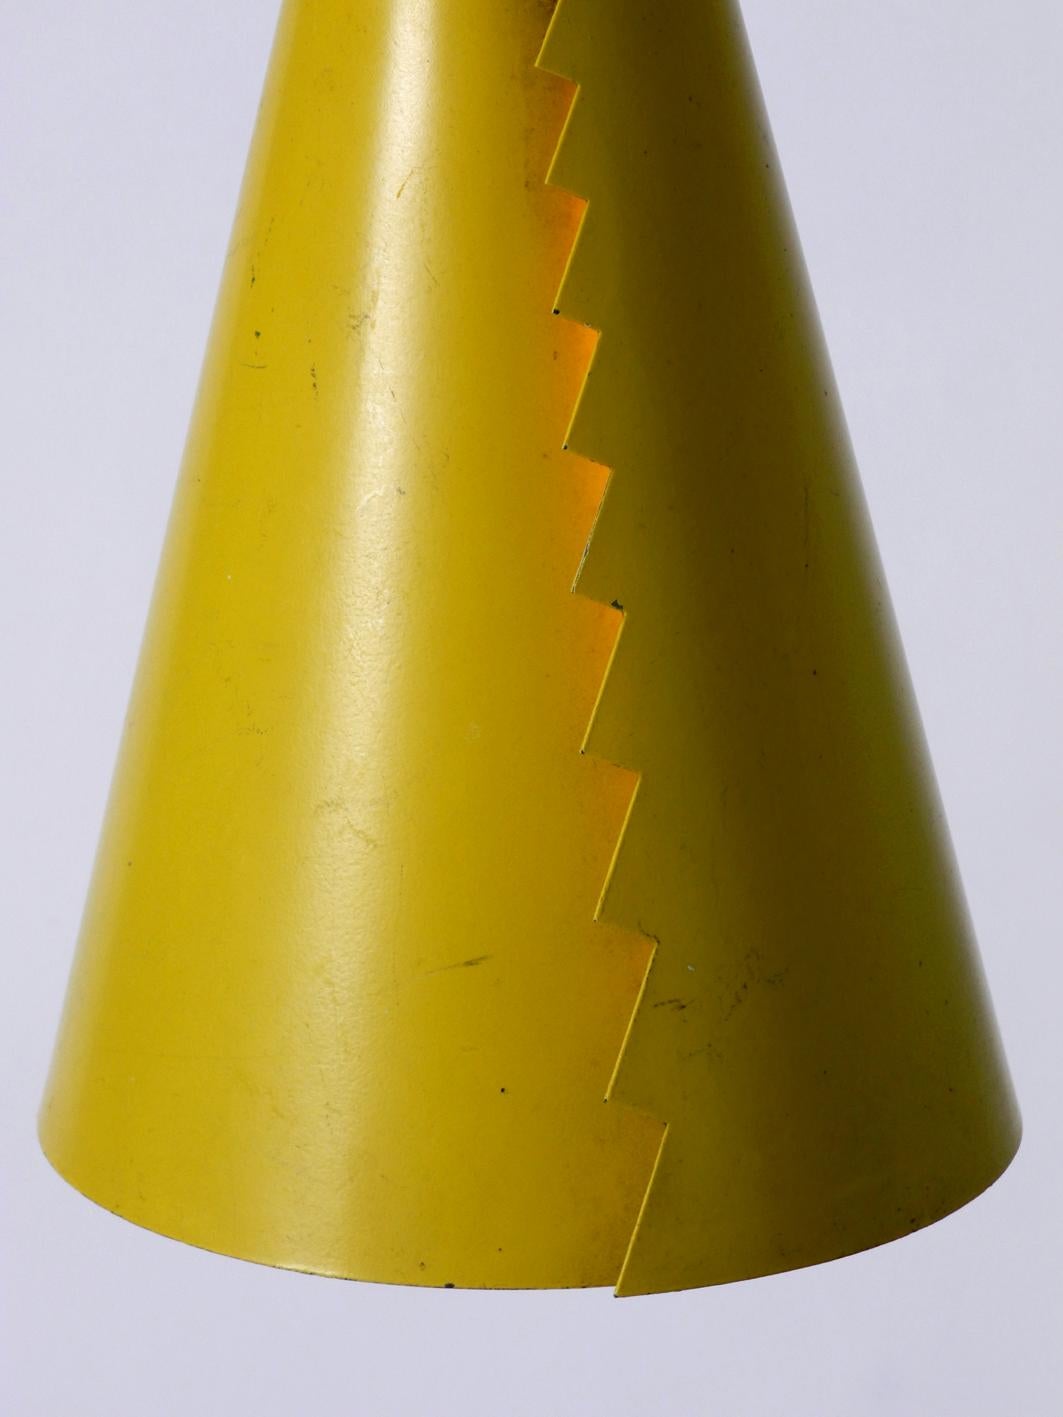 Metal Rare Mid-Century Modern Cone Shaped Pendant Lamp Made of Sheet Steel in Yellow For Sale